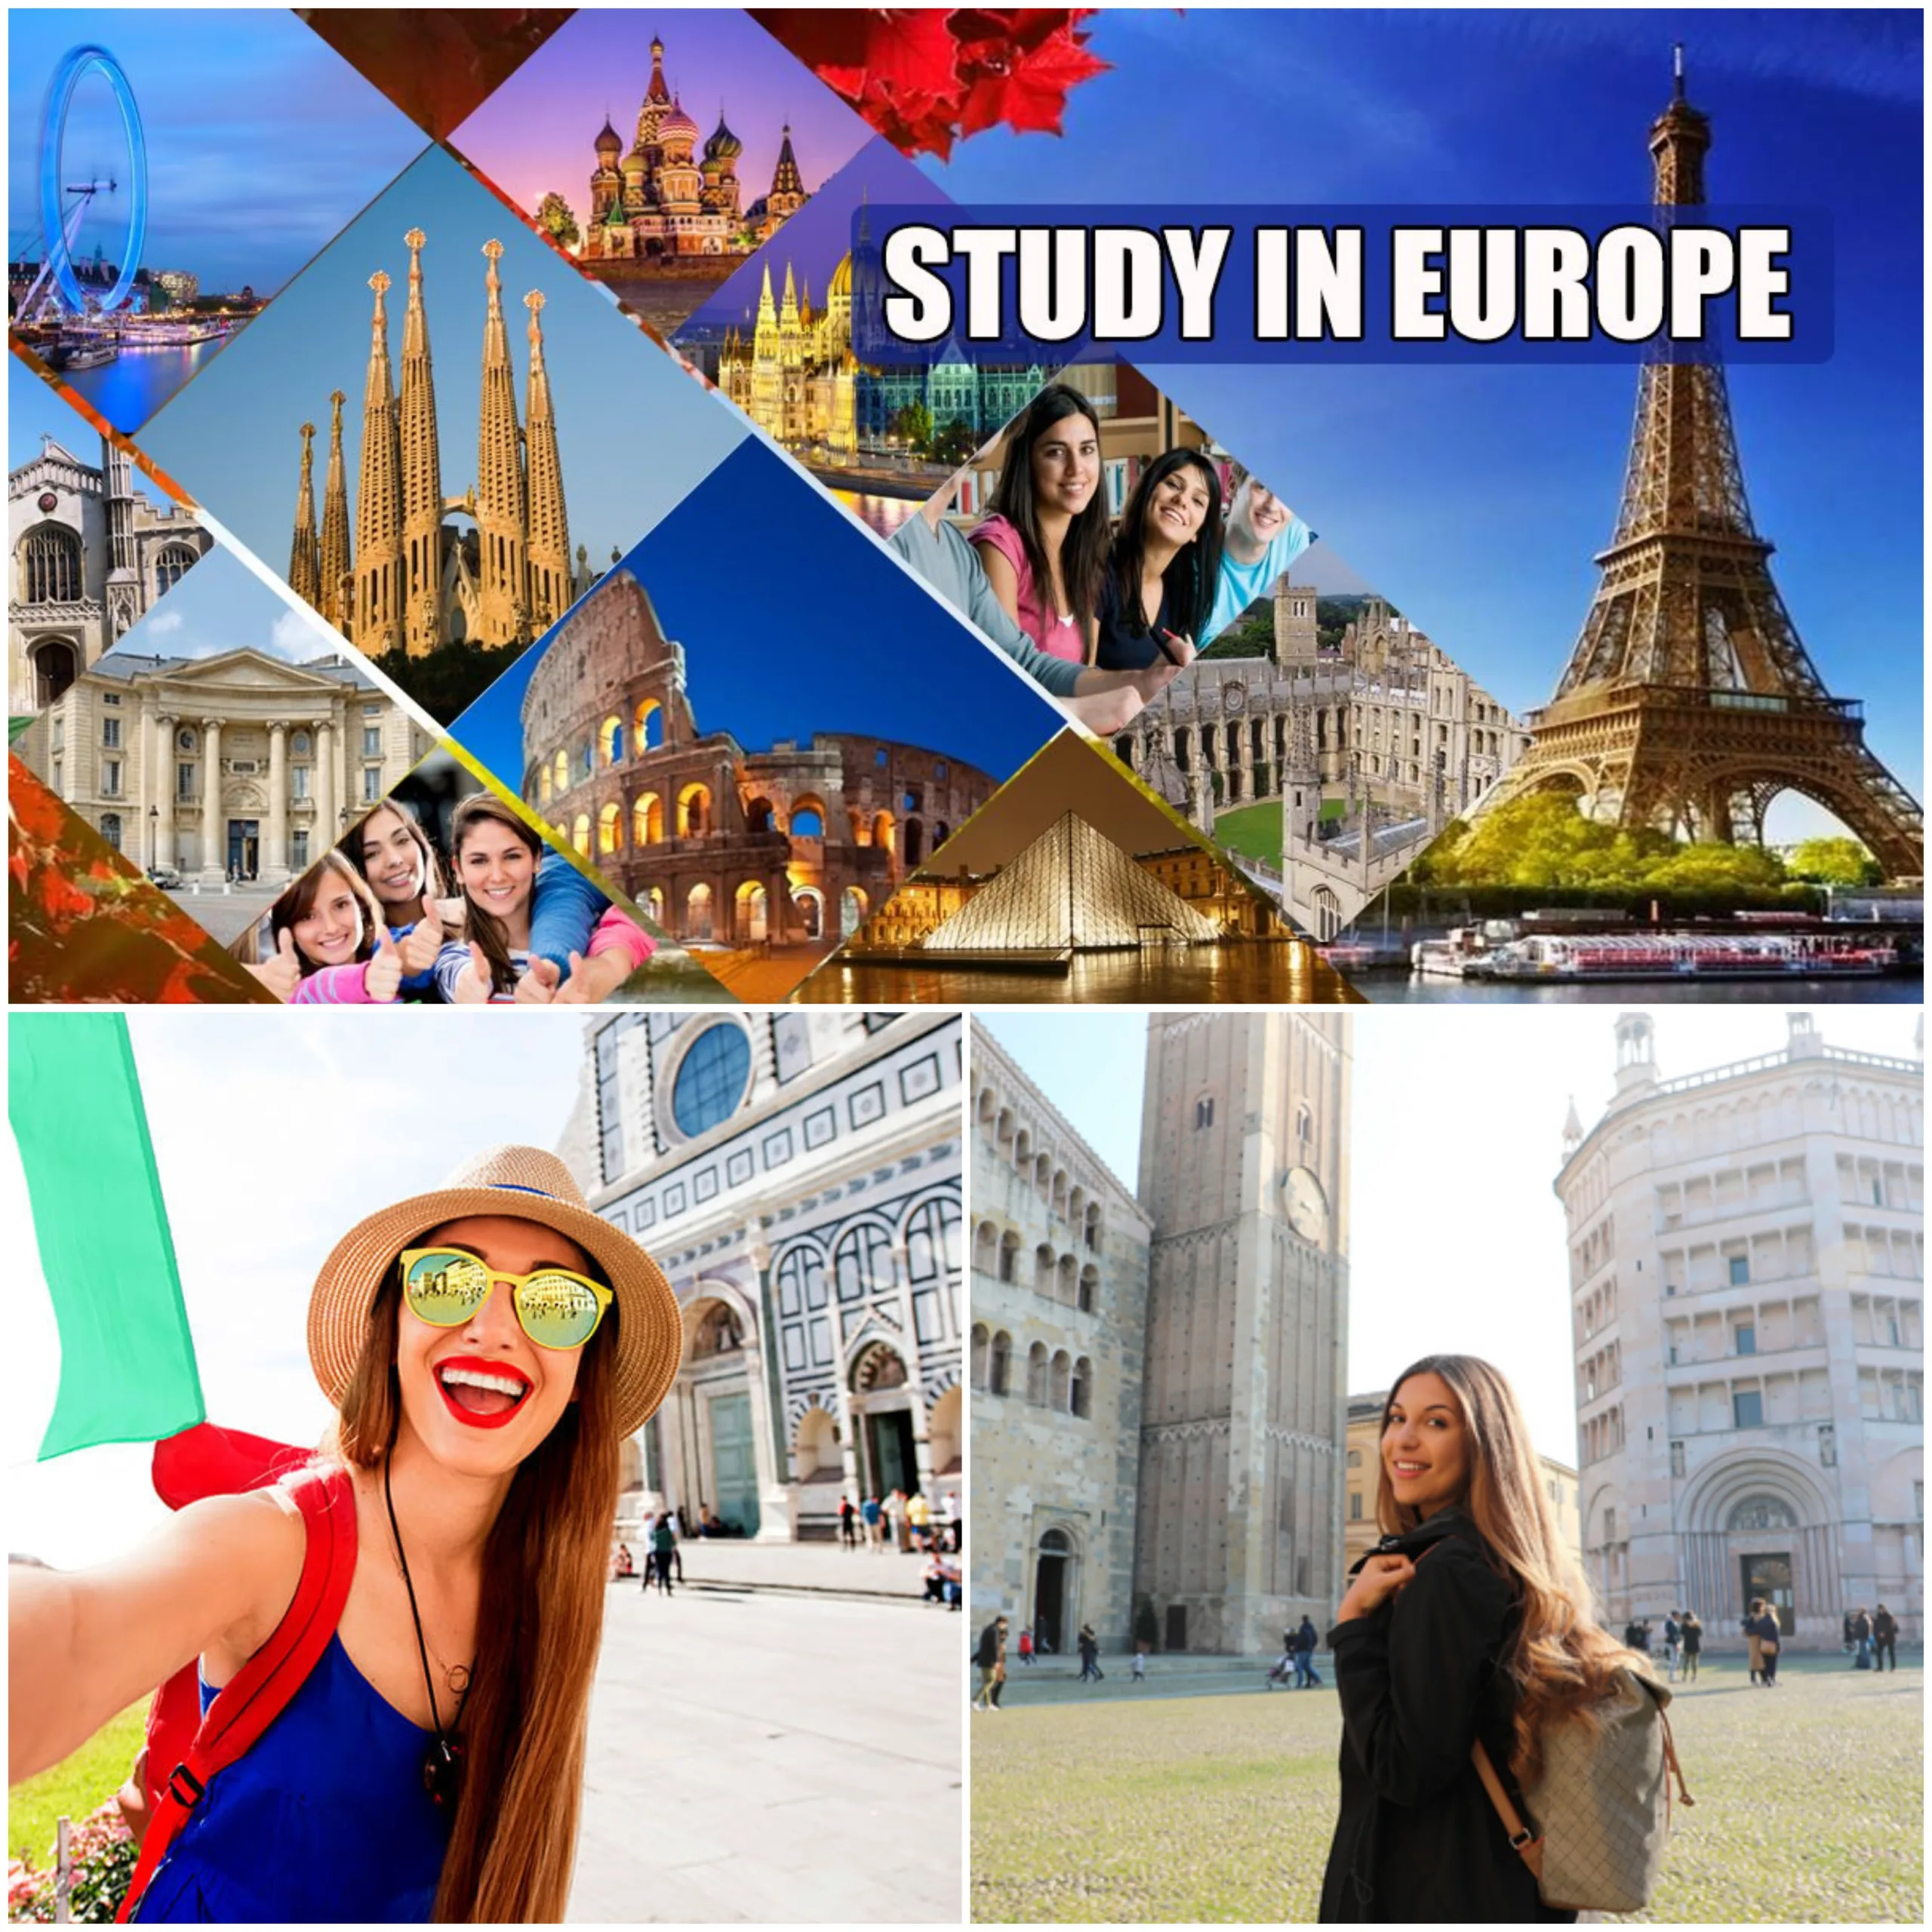 which country of Europe is best for study